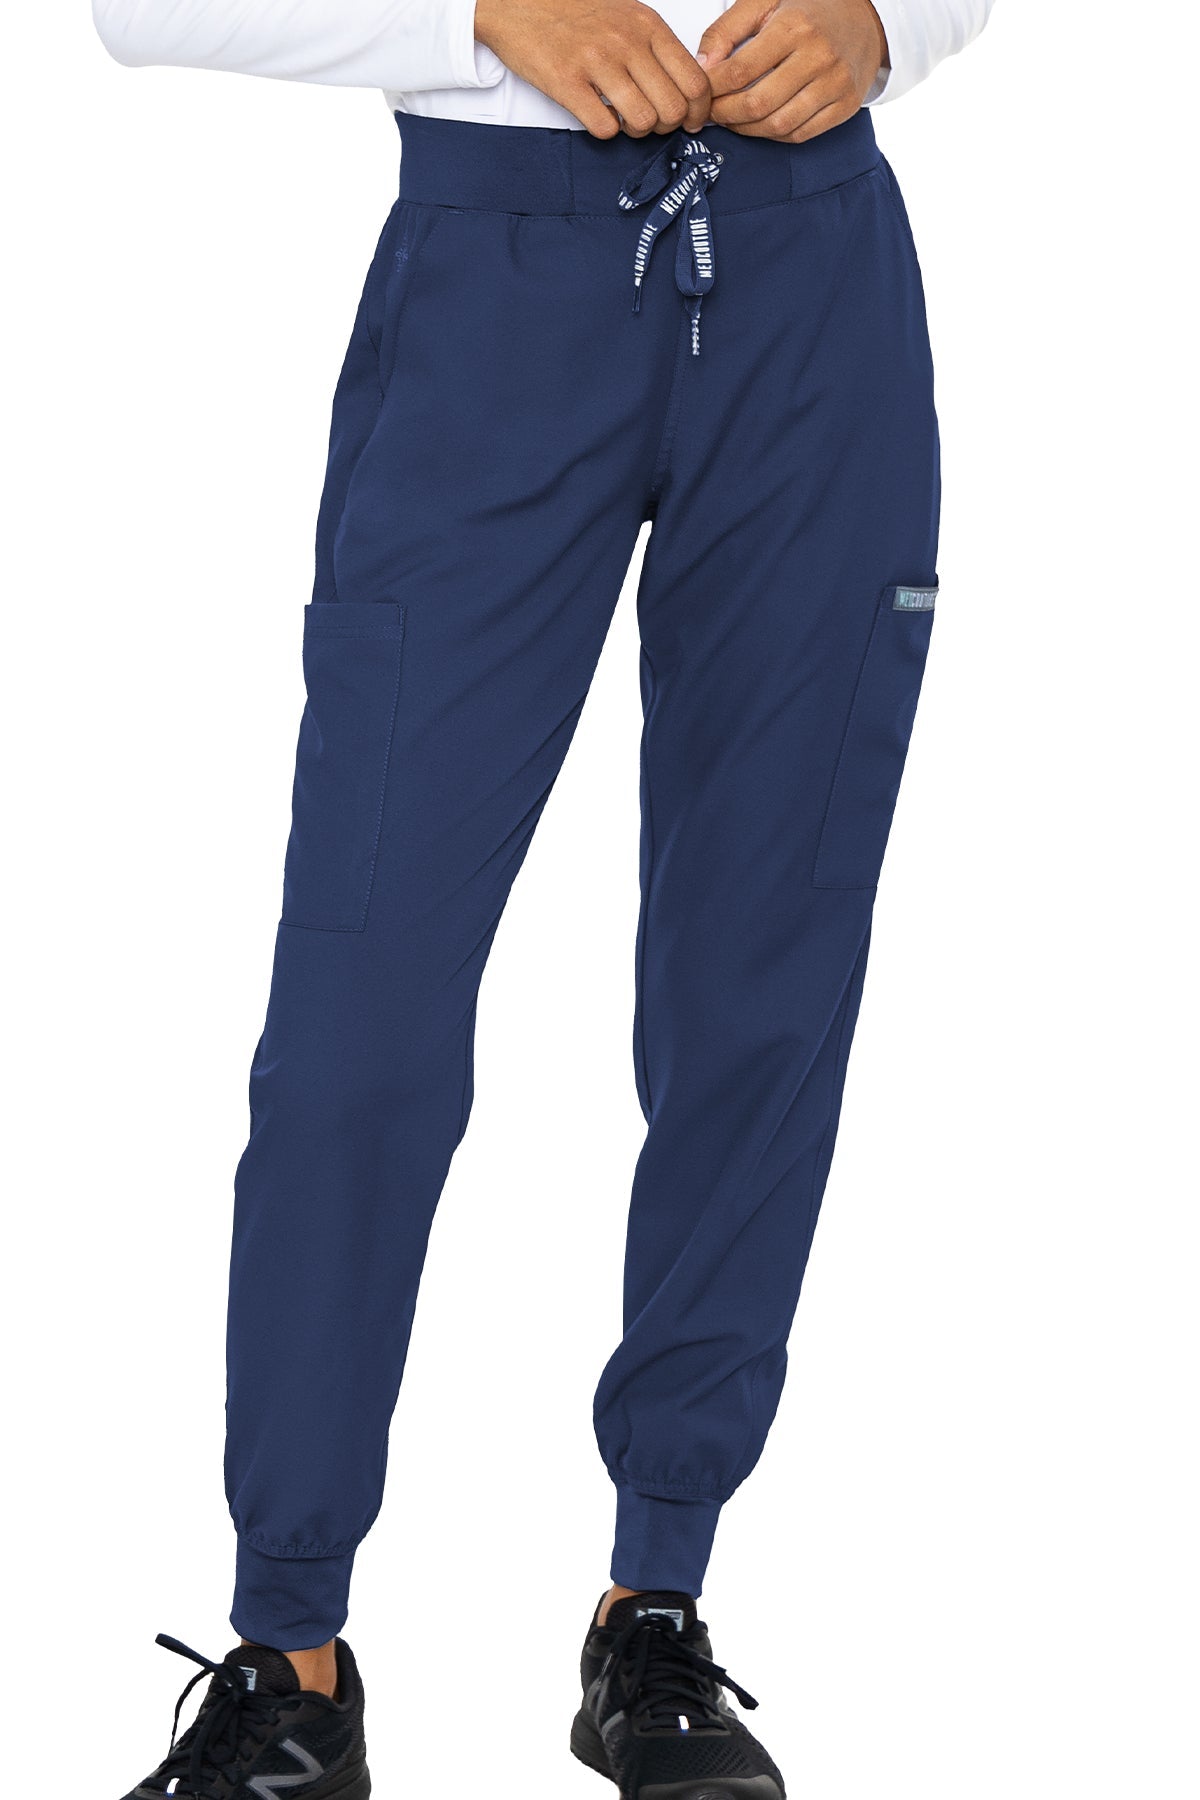 Med Couture Petite Scrub Pants Insight Jogger Pant in Navy at Parker's Clothing and Shoes.